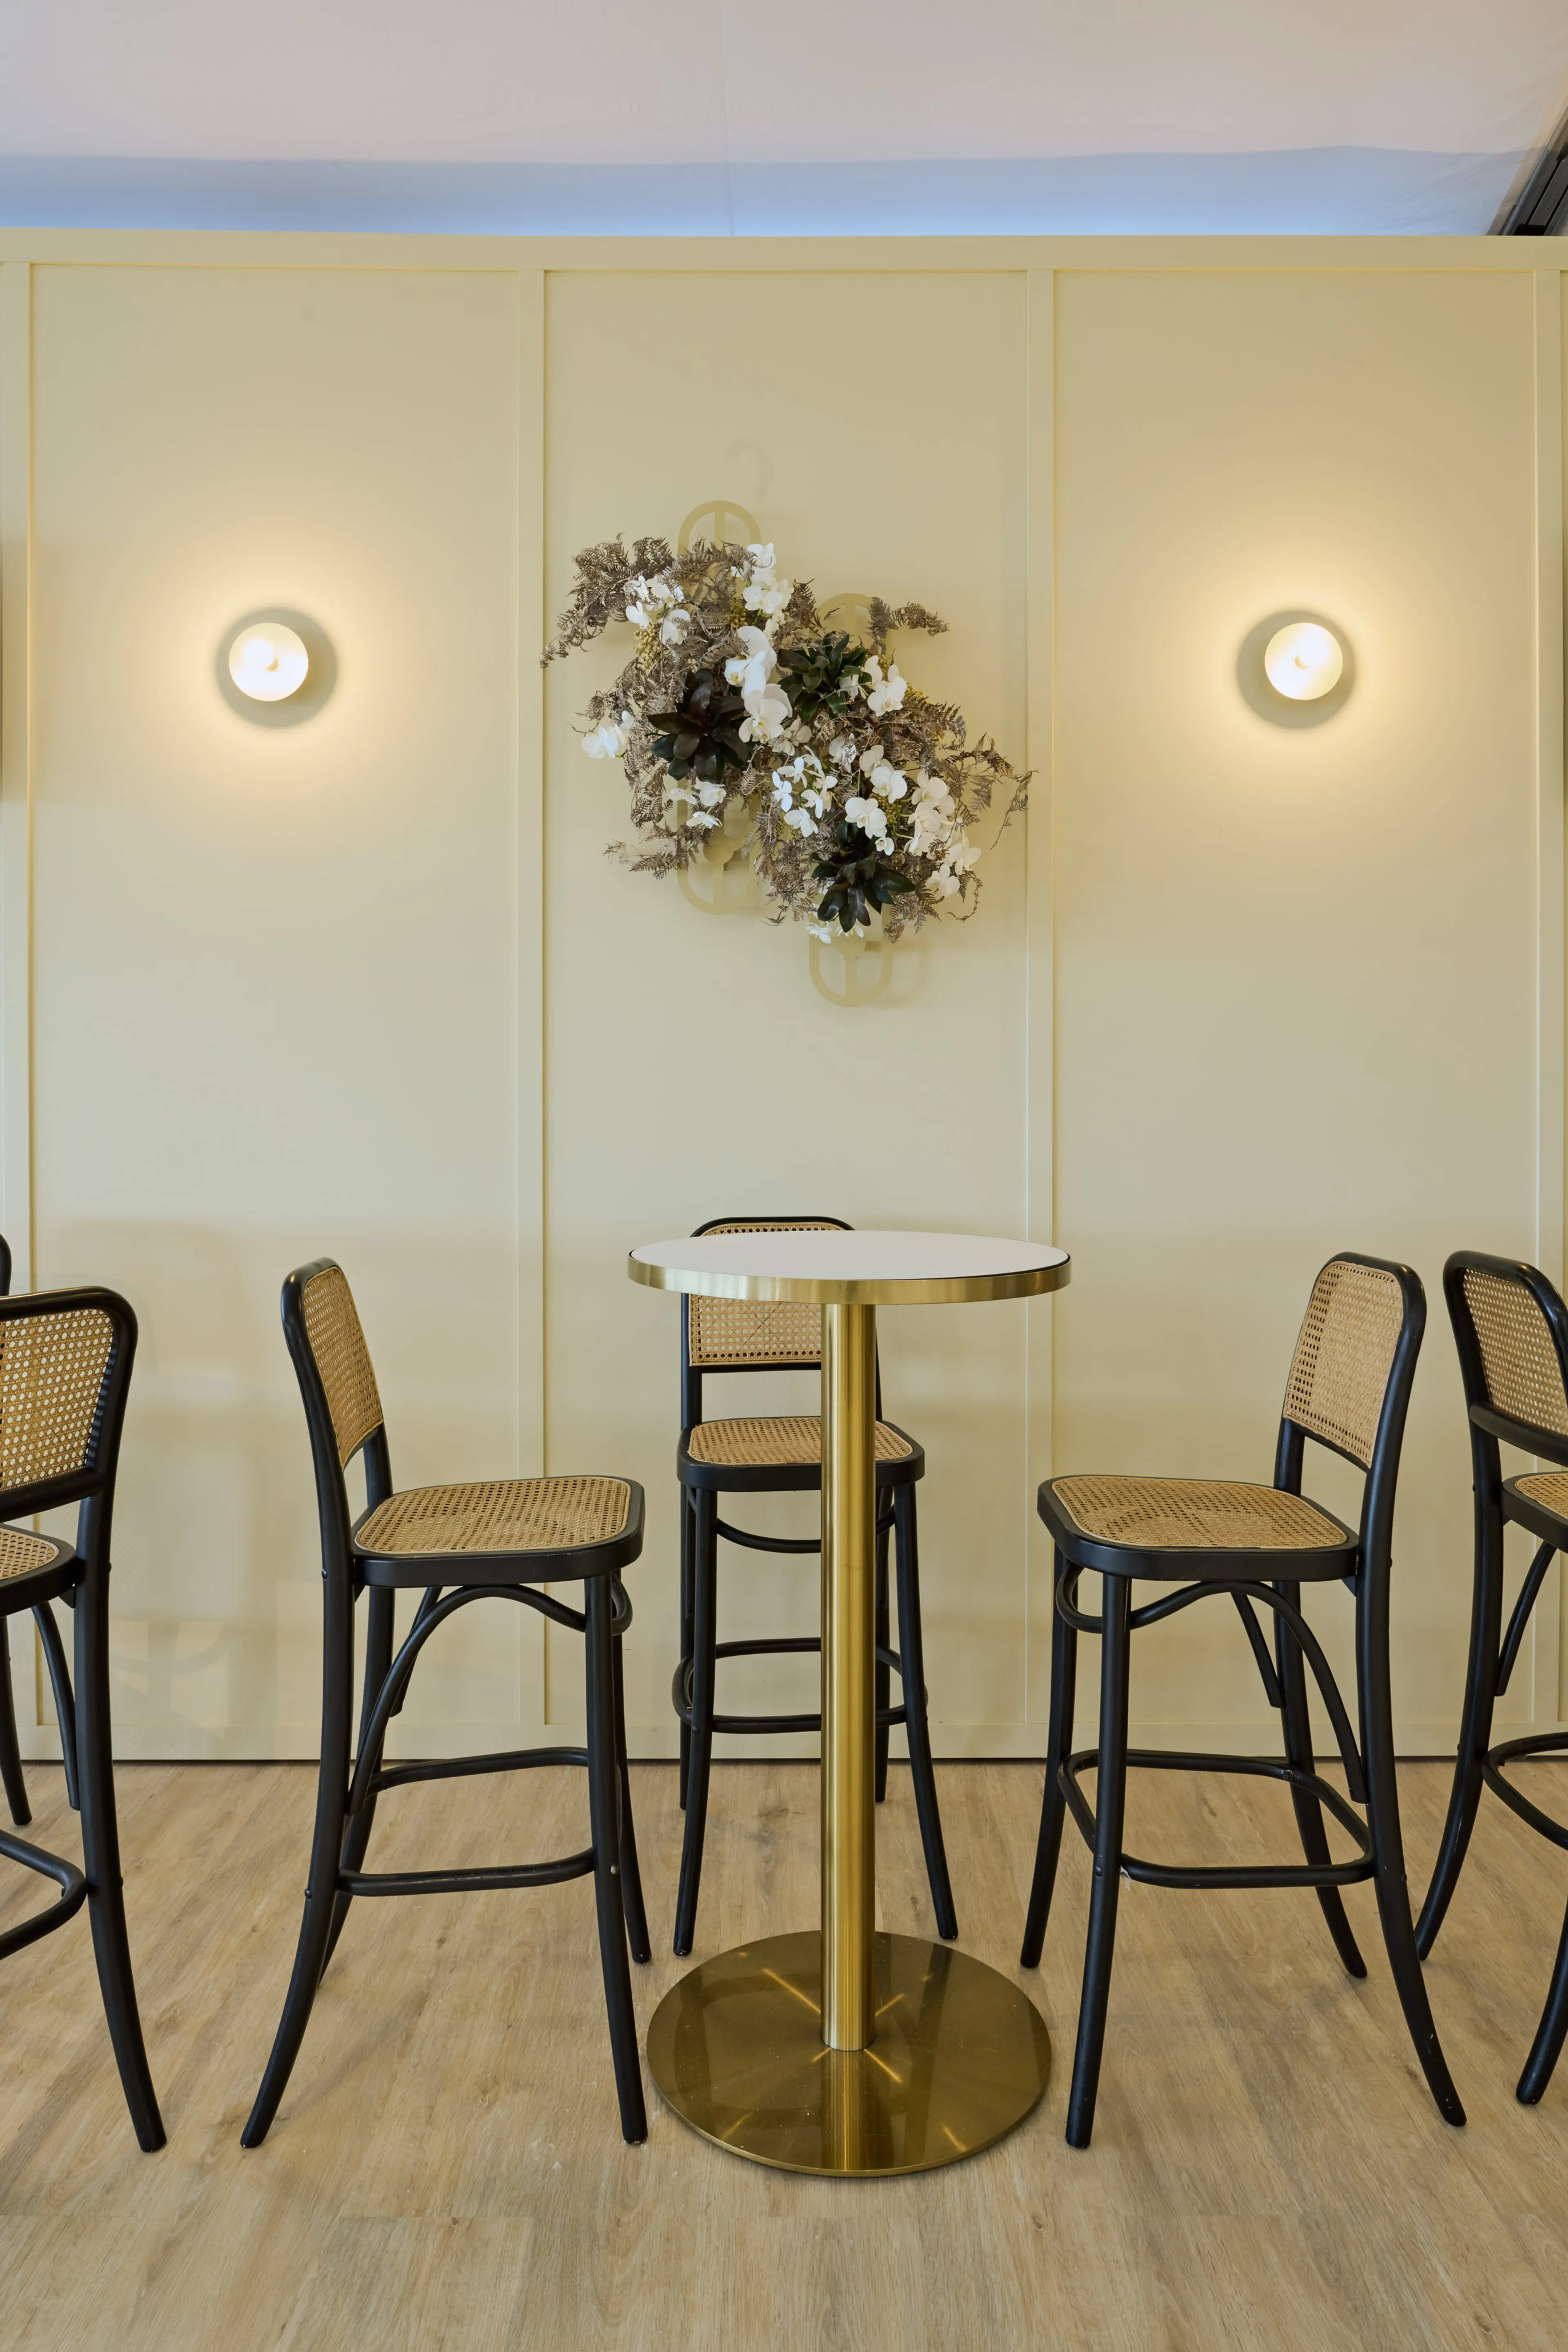 Champagne House at Caulfield Cup - hospitality interior design, fabrication and build - Caulfield Racecourse, Melbourne, Australia